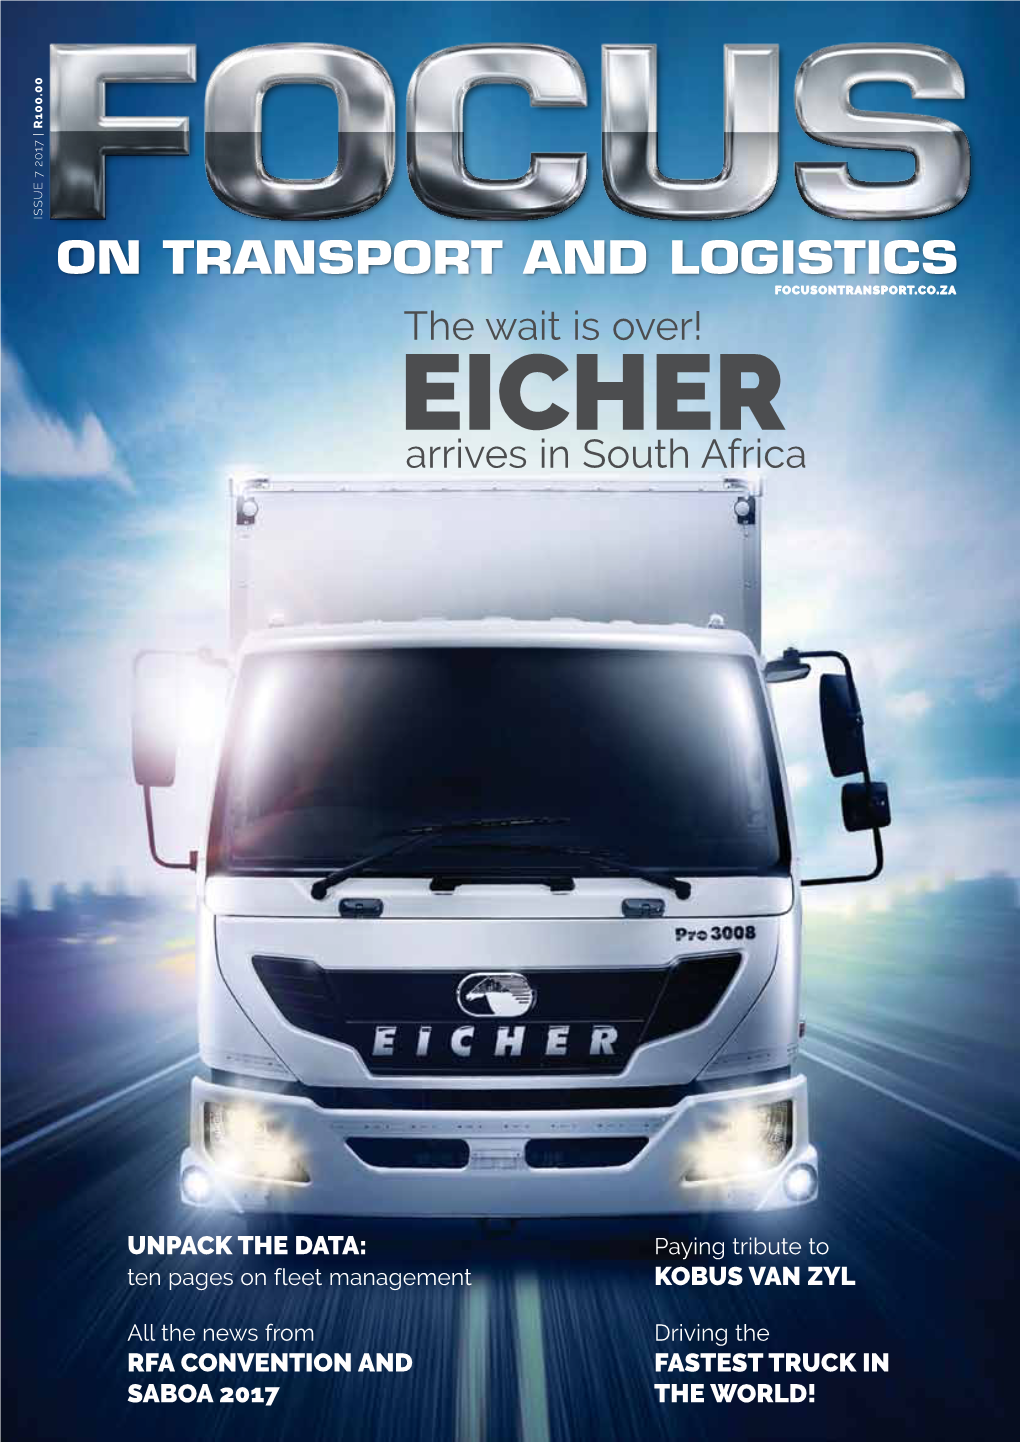 Eicher Arrives in South Africa